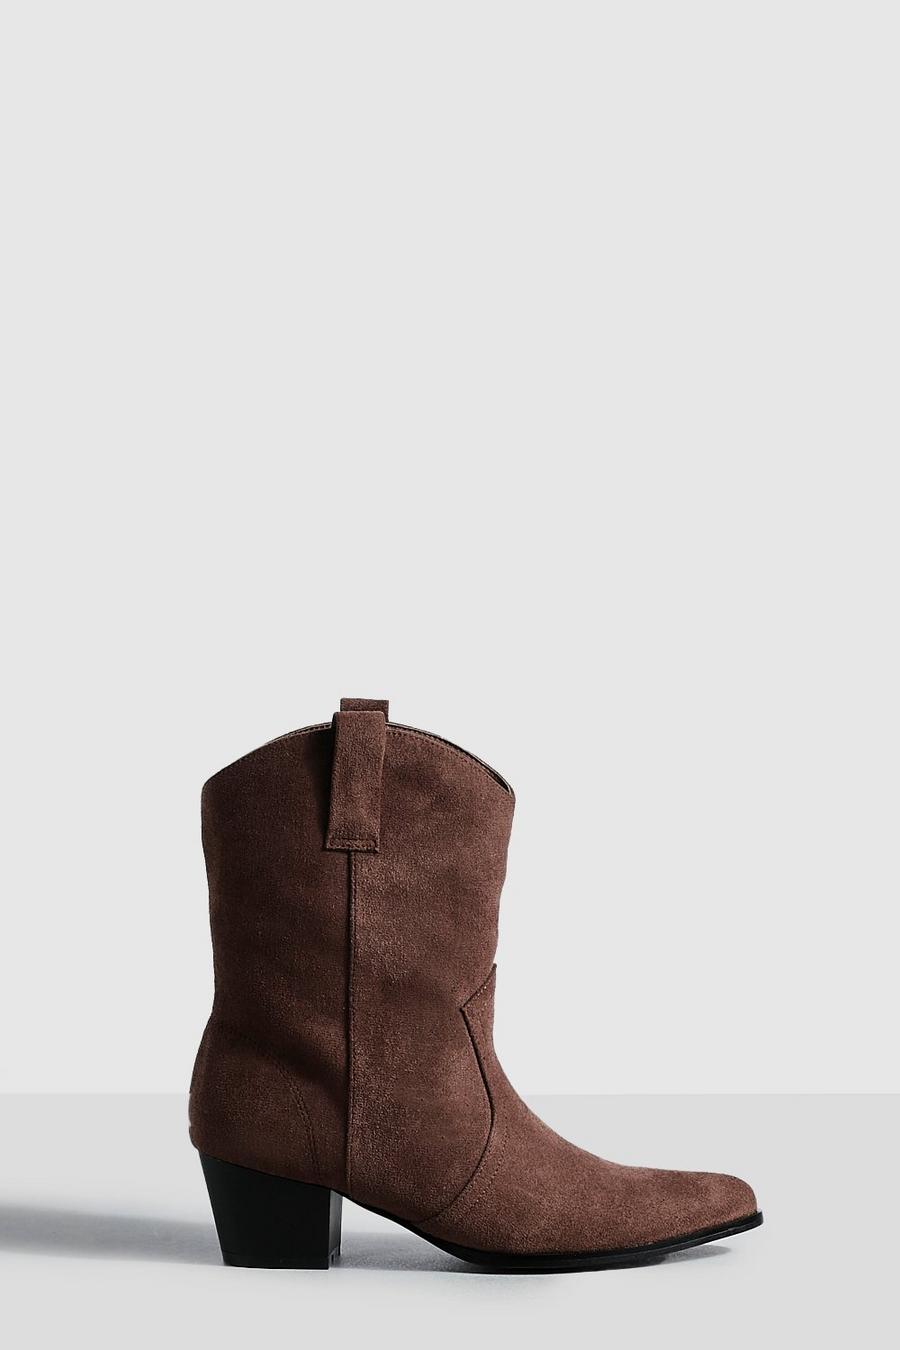 Chocolate Basic Tab Detail Western Cowboy Ankle Boots